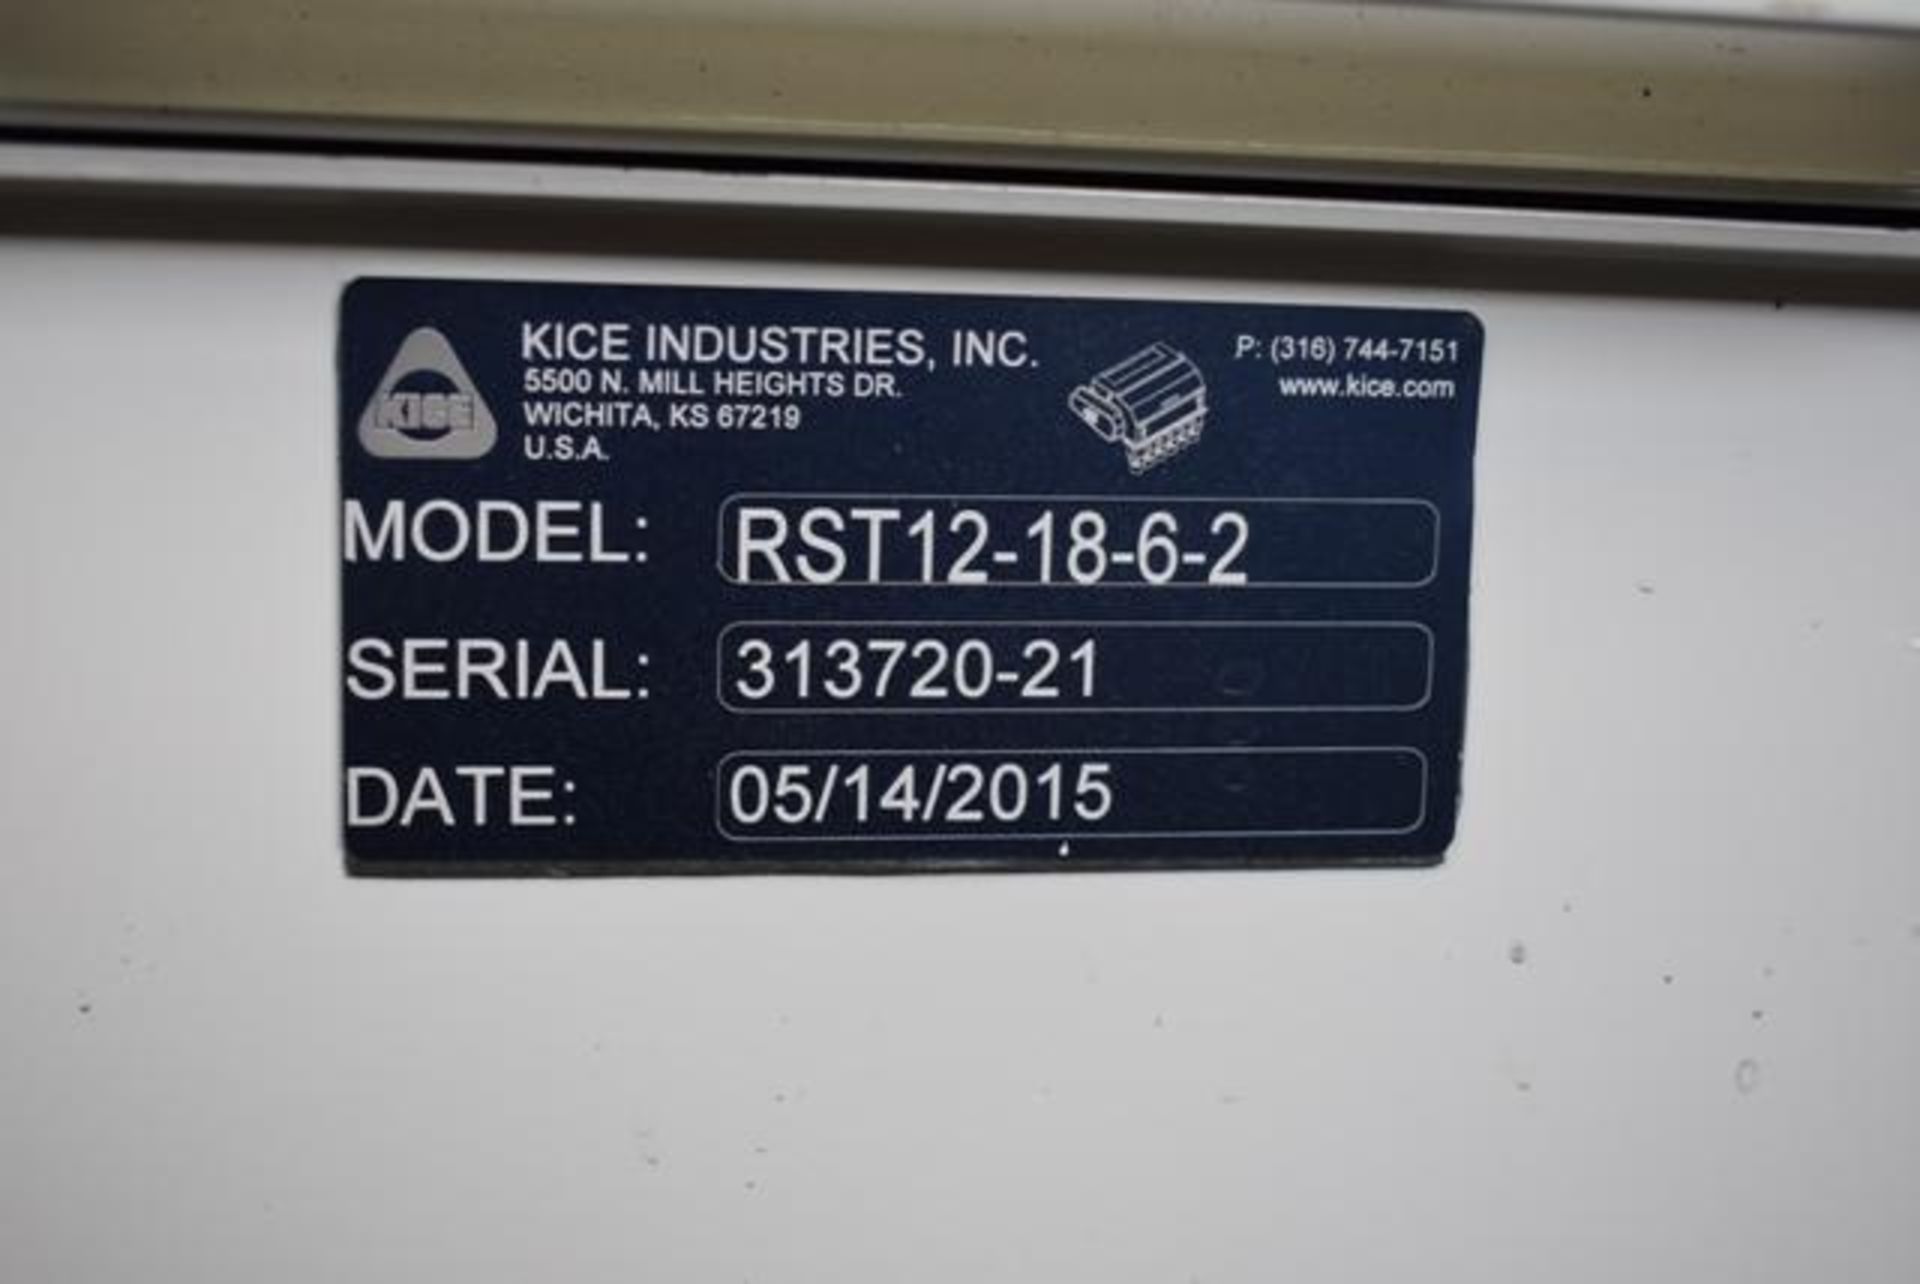 KICE Impact Mill Model #RST12-18-6-2, Includes Cyclone and KICE Model #VJ10x8x8 Rotary Valve - Image 4 of 6